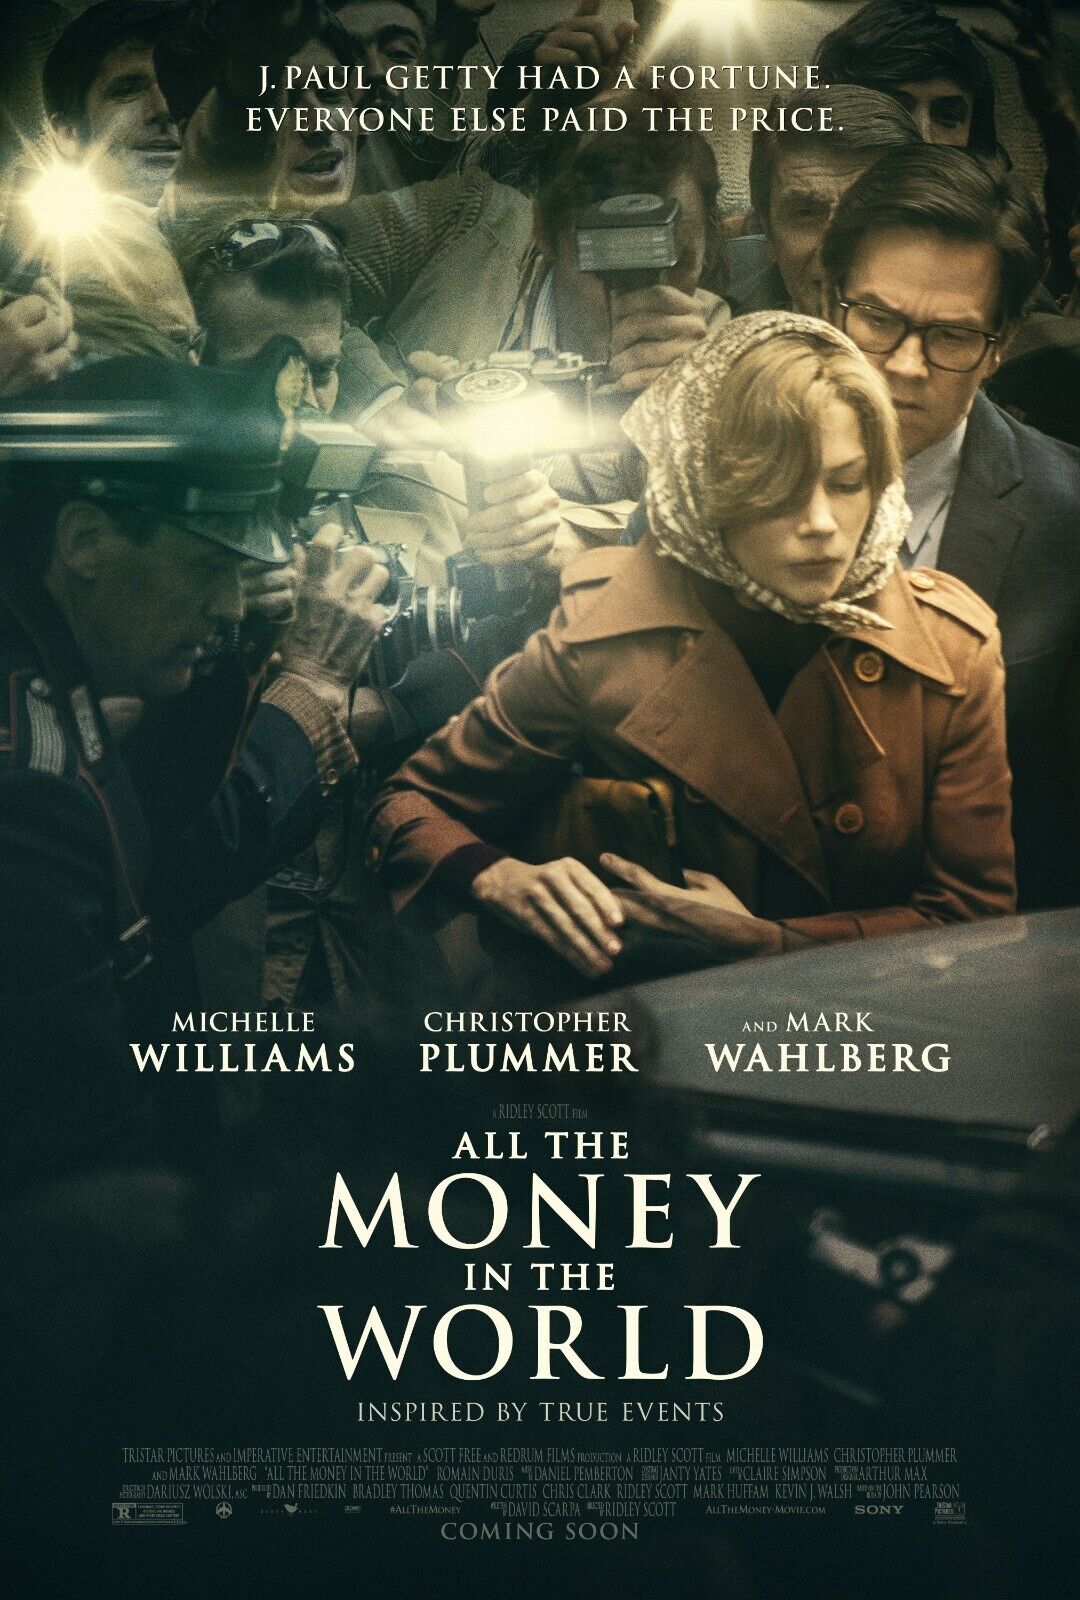 All The Money in The World Movie Poster 2017 - 11x17 Inches | NEW USA